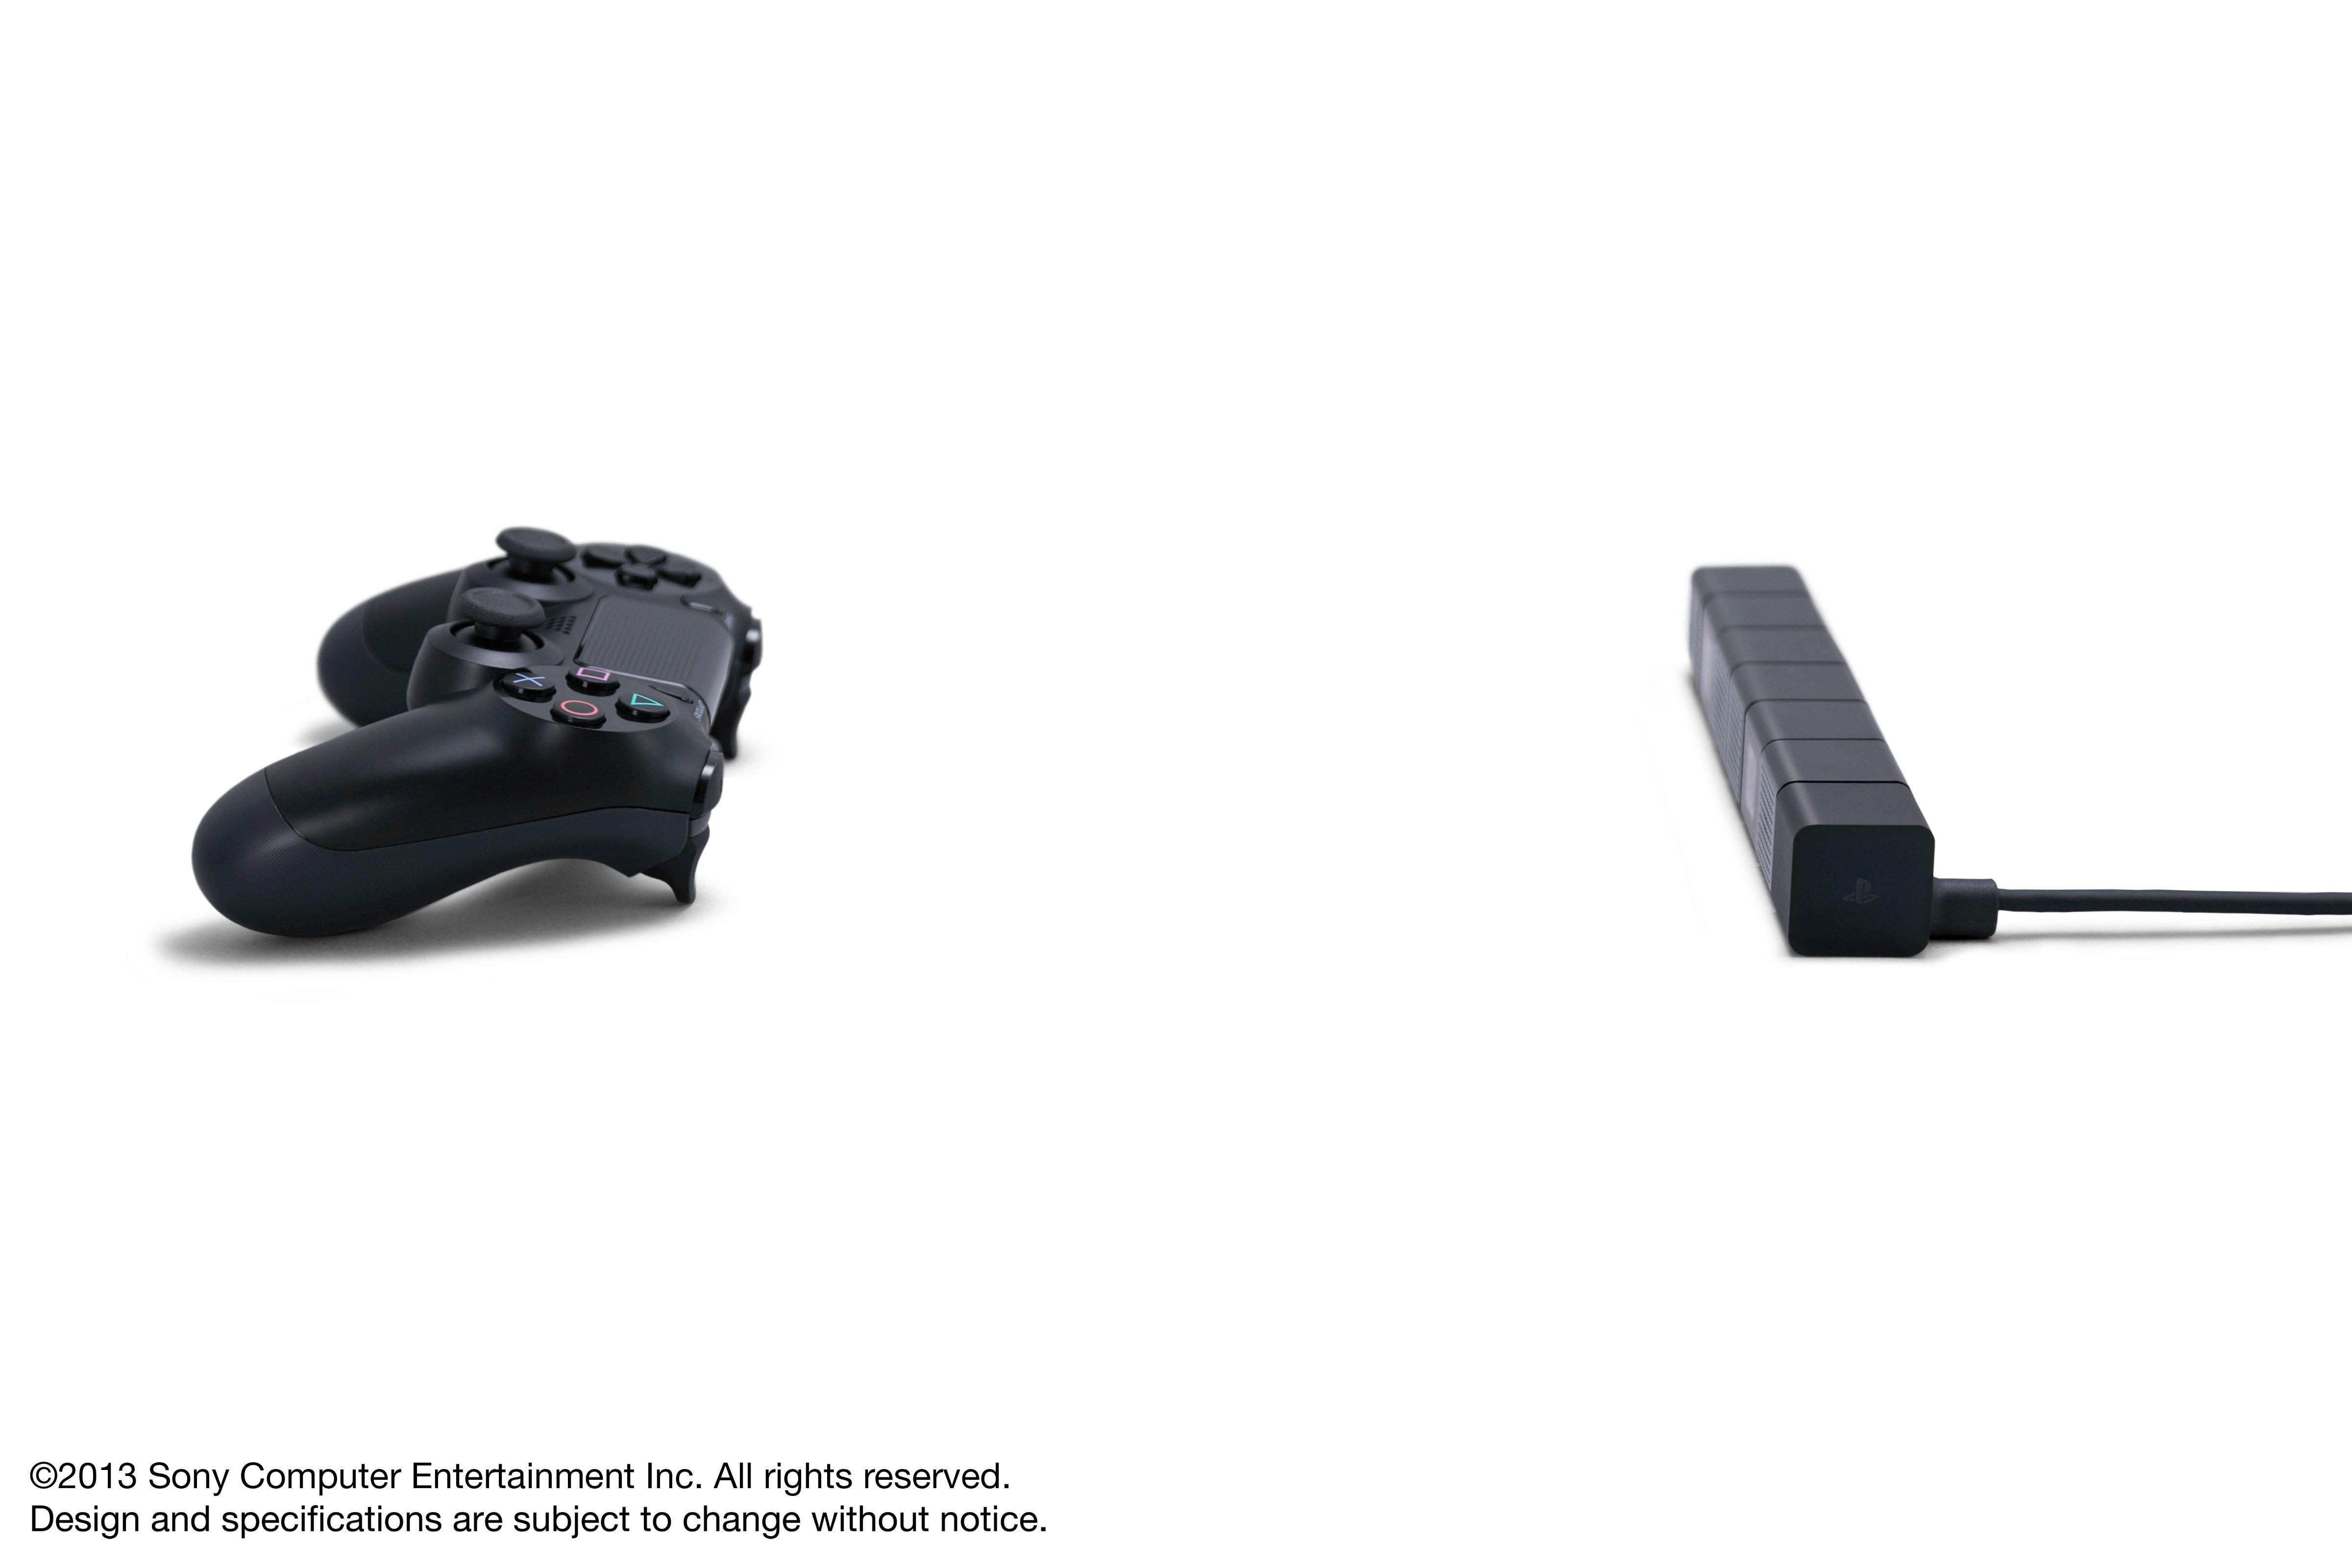 Can You Use the PS4 PlayStation Camera on a PS5?